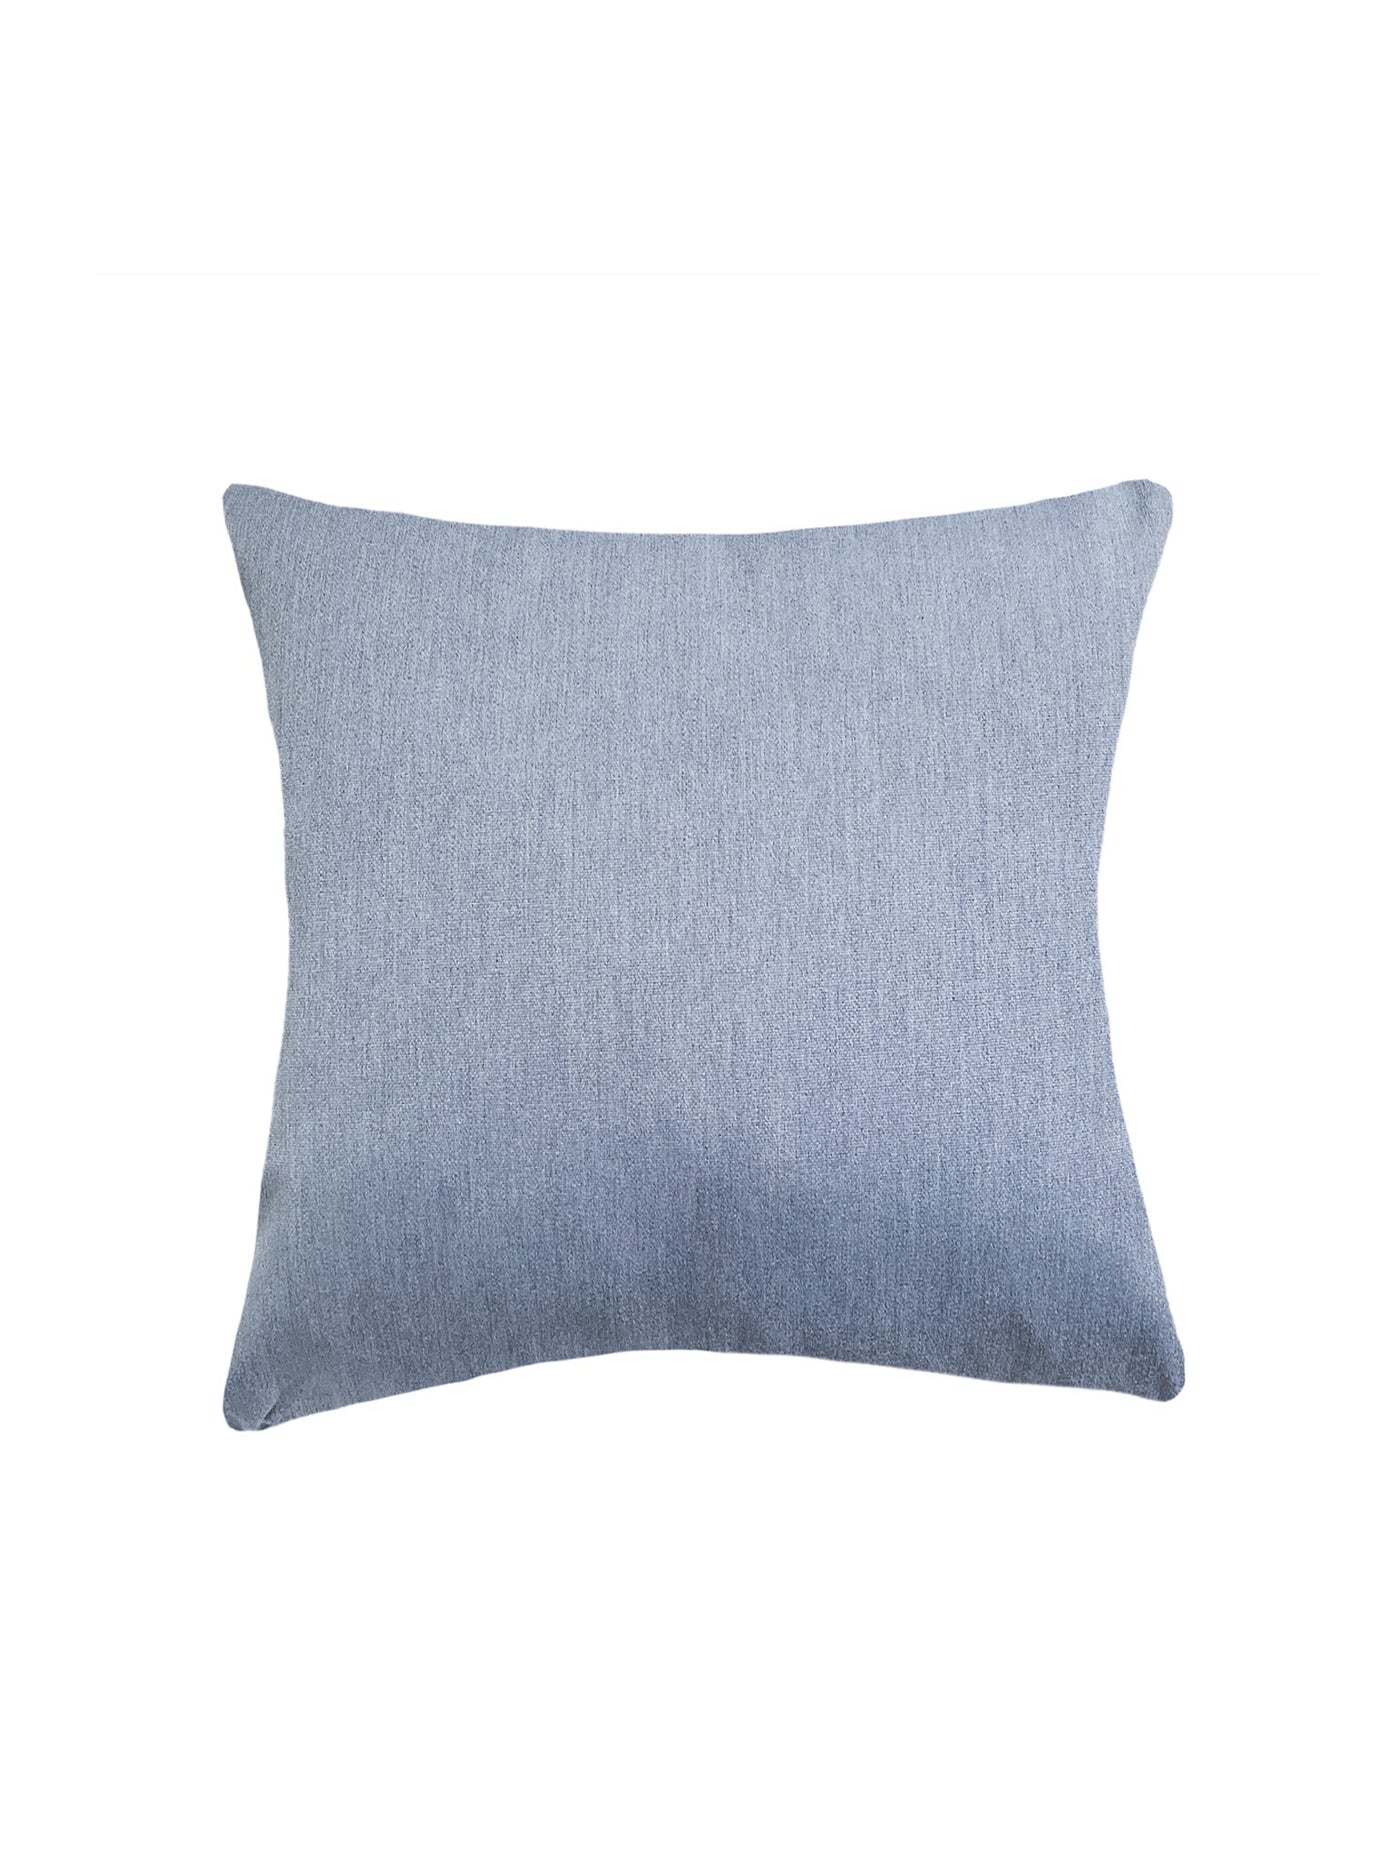 Luxe Essential Indigo Outdoor Pillow by Anaya